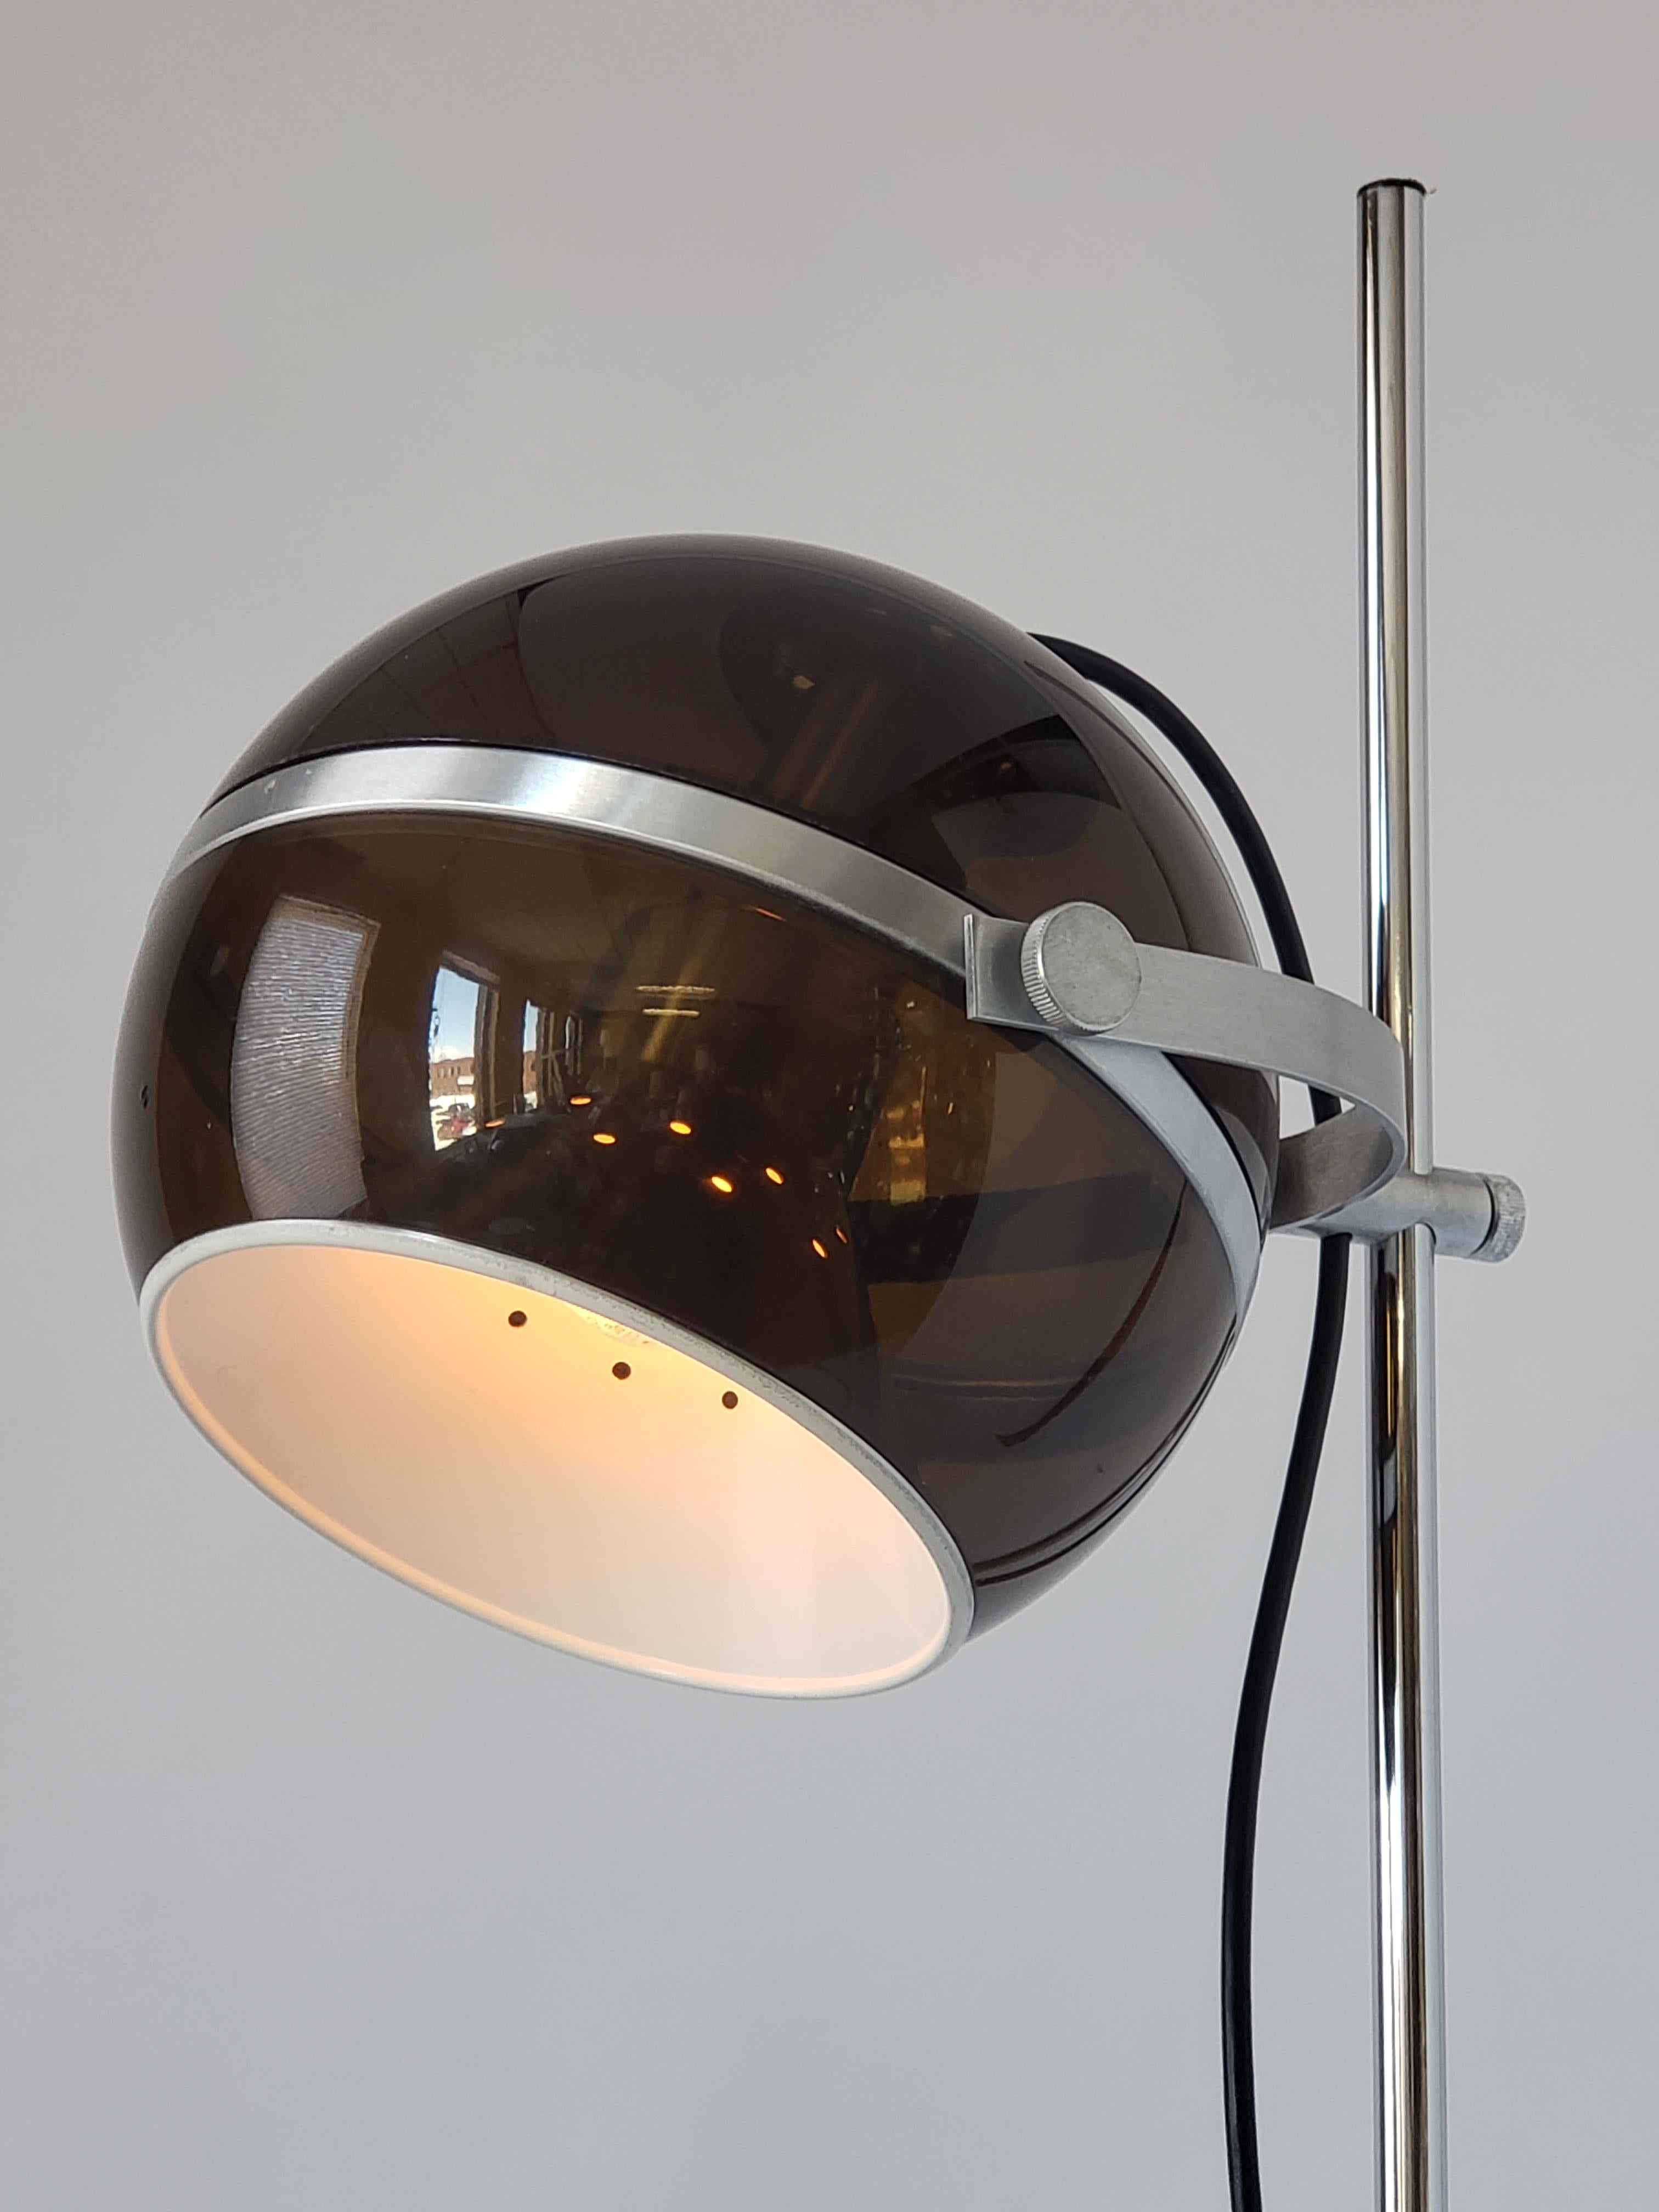 Well made floor lamp with a dark smoked acrylic shade fitted with an enameled vented aluminium diffuser.
 
Rotate in all direction, slide and lock anywhere on pole. 

Contain one E26 size socket rated at 60 watt max. 

Switch on cord.